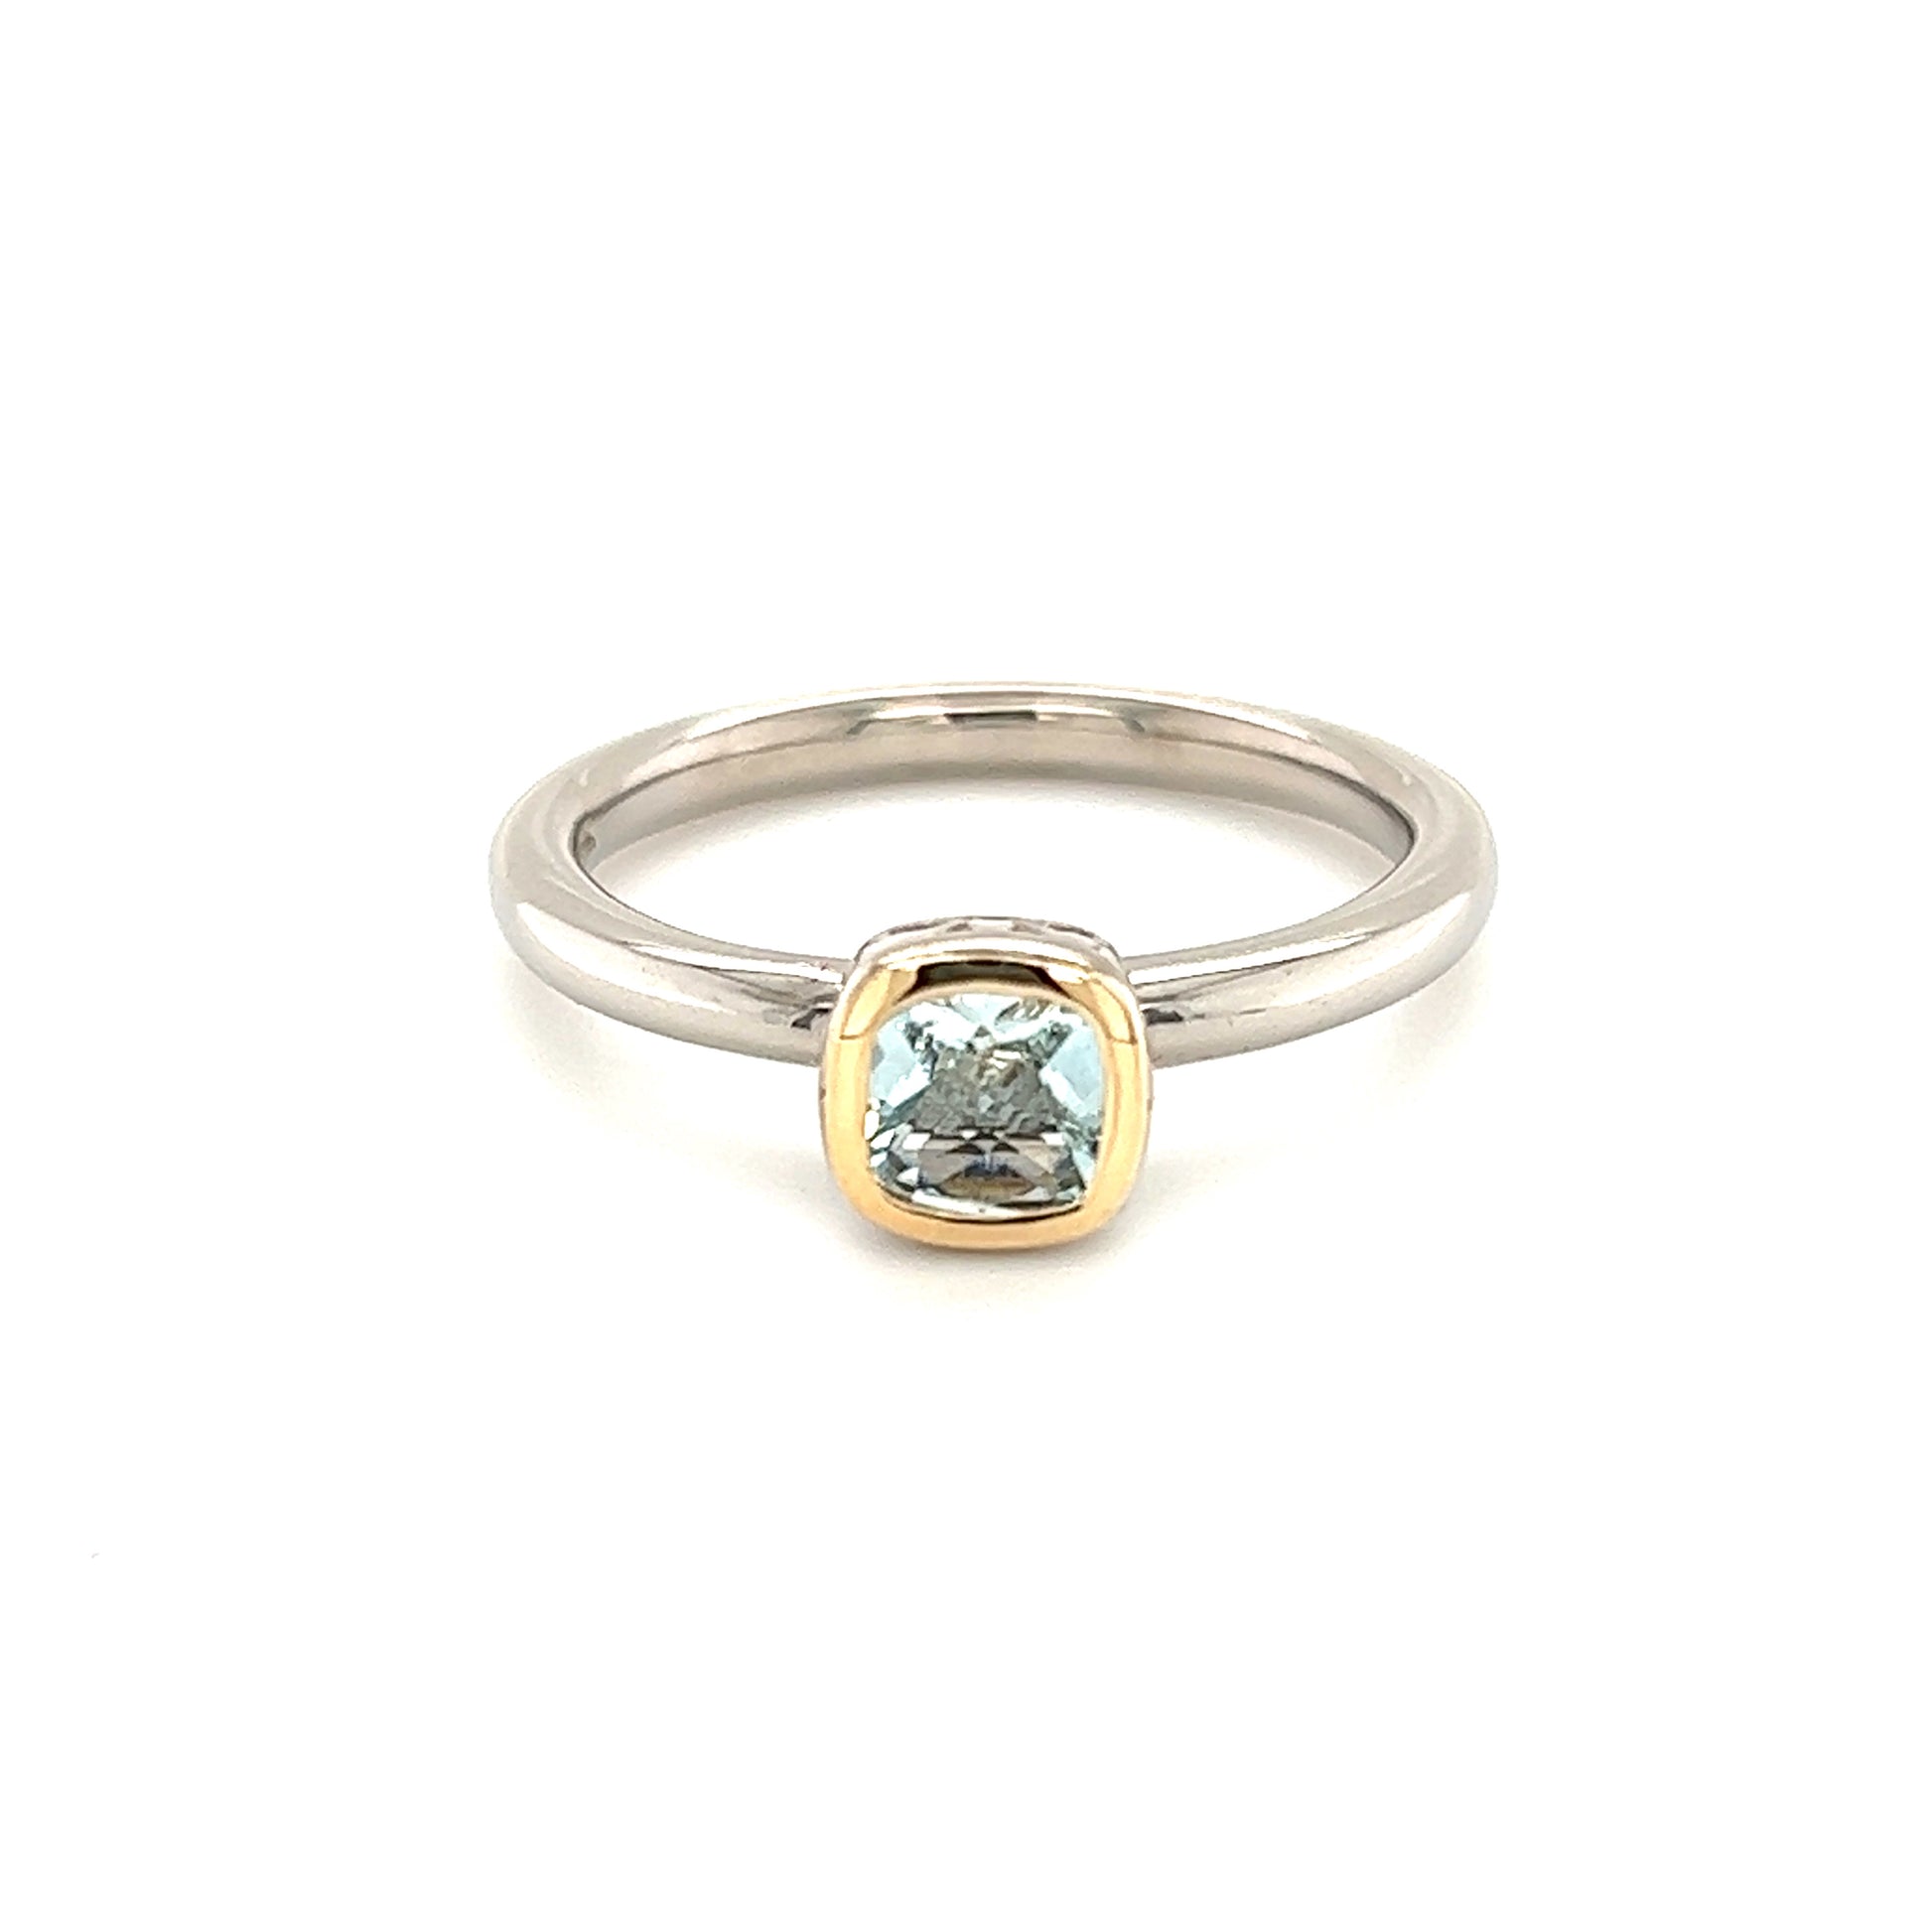 Cushion Aquamarine Ring in Sterling Silver with 14K Yellow Gold Accent Front Top View